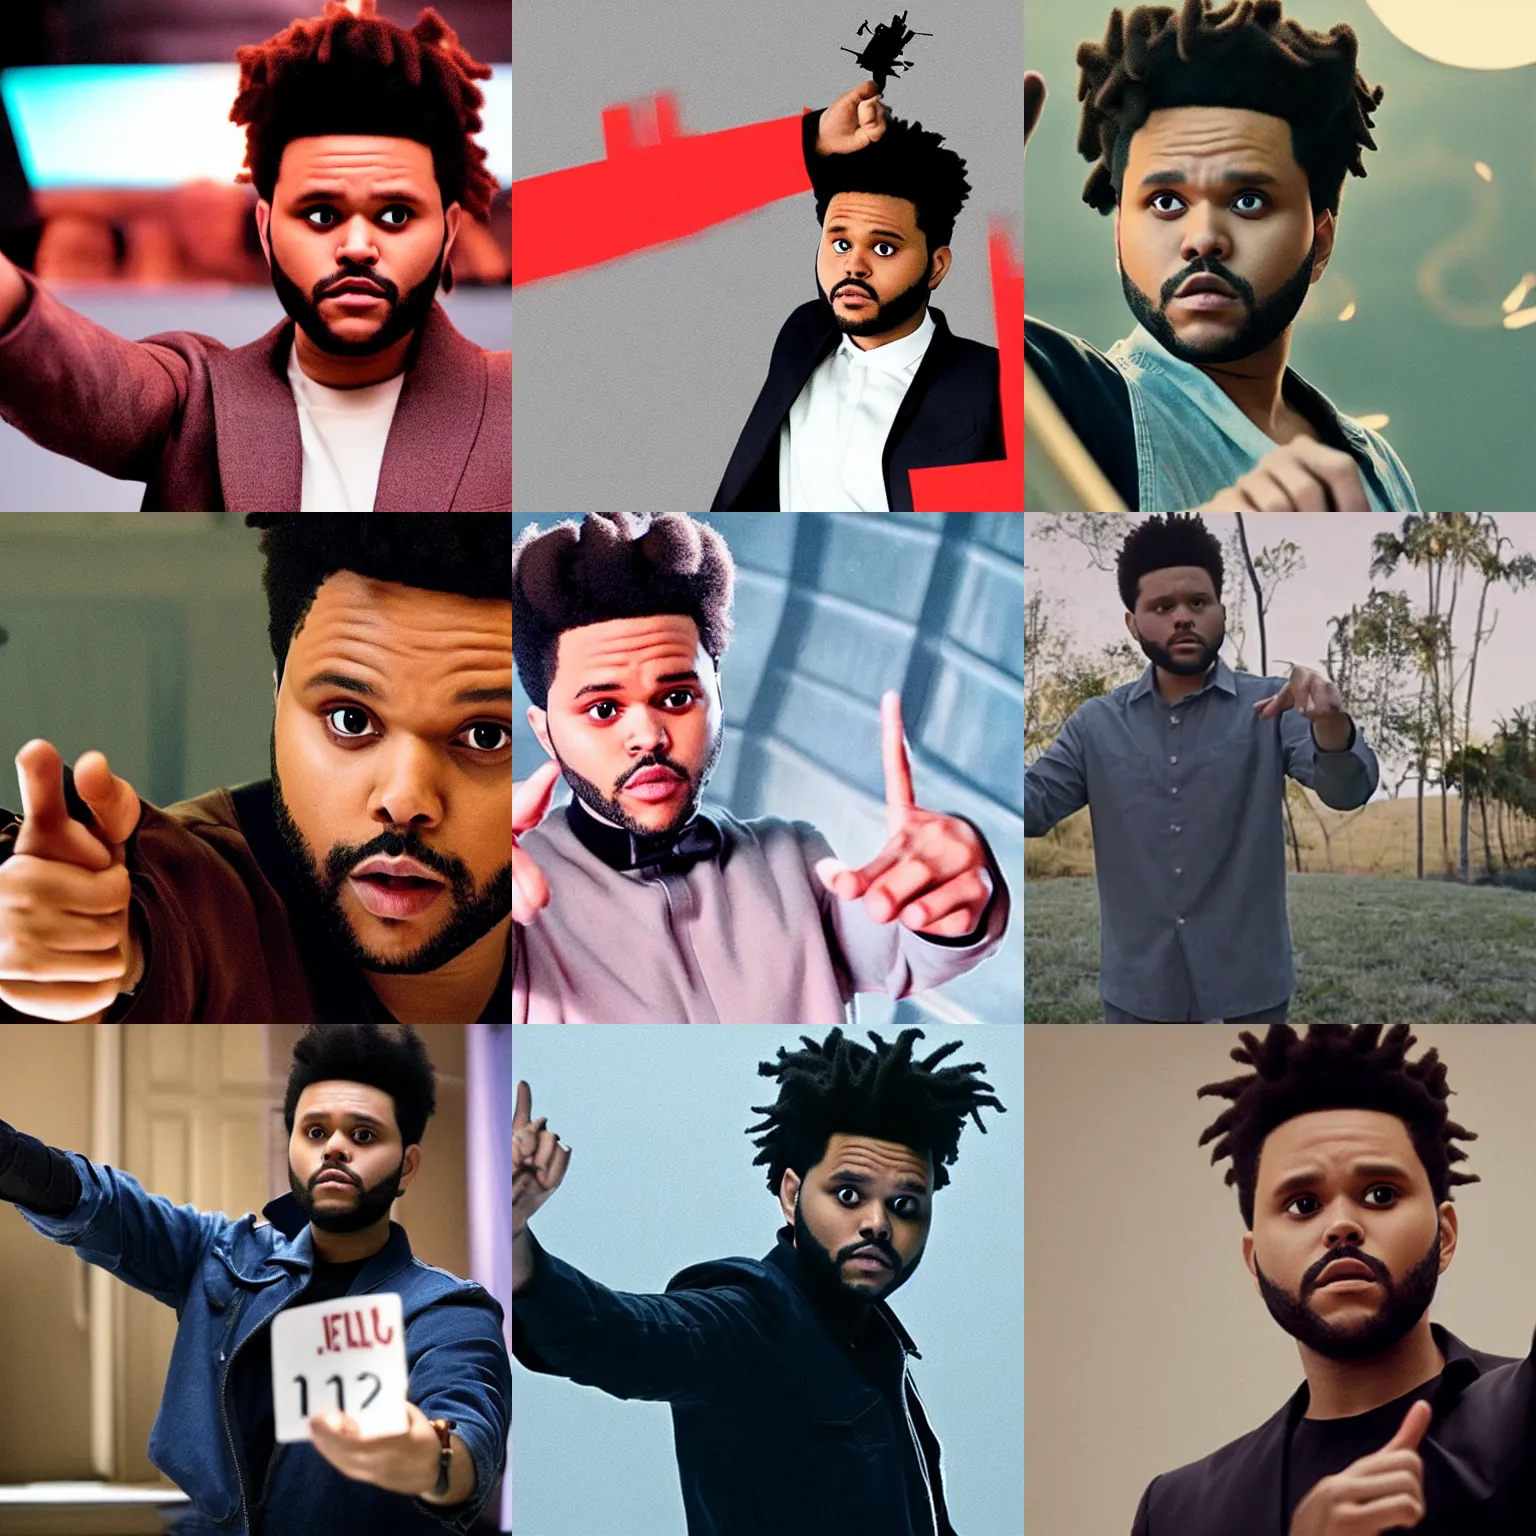 Prompt: a scene from a movie, The Weeknd pointing to his favorite day of the week on a calendar